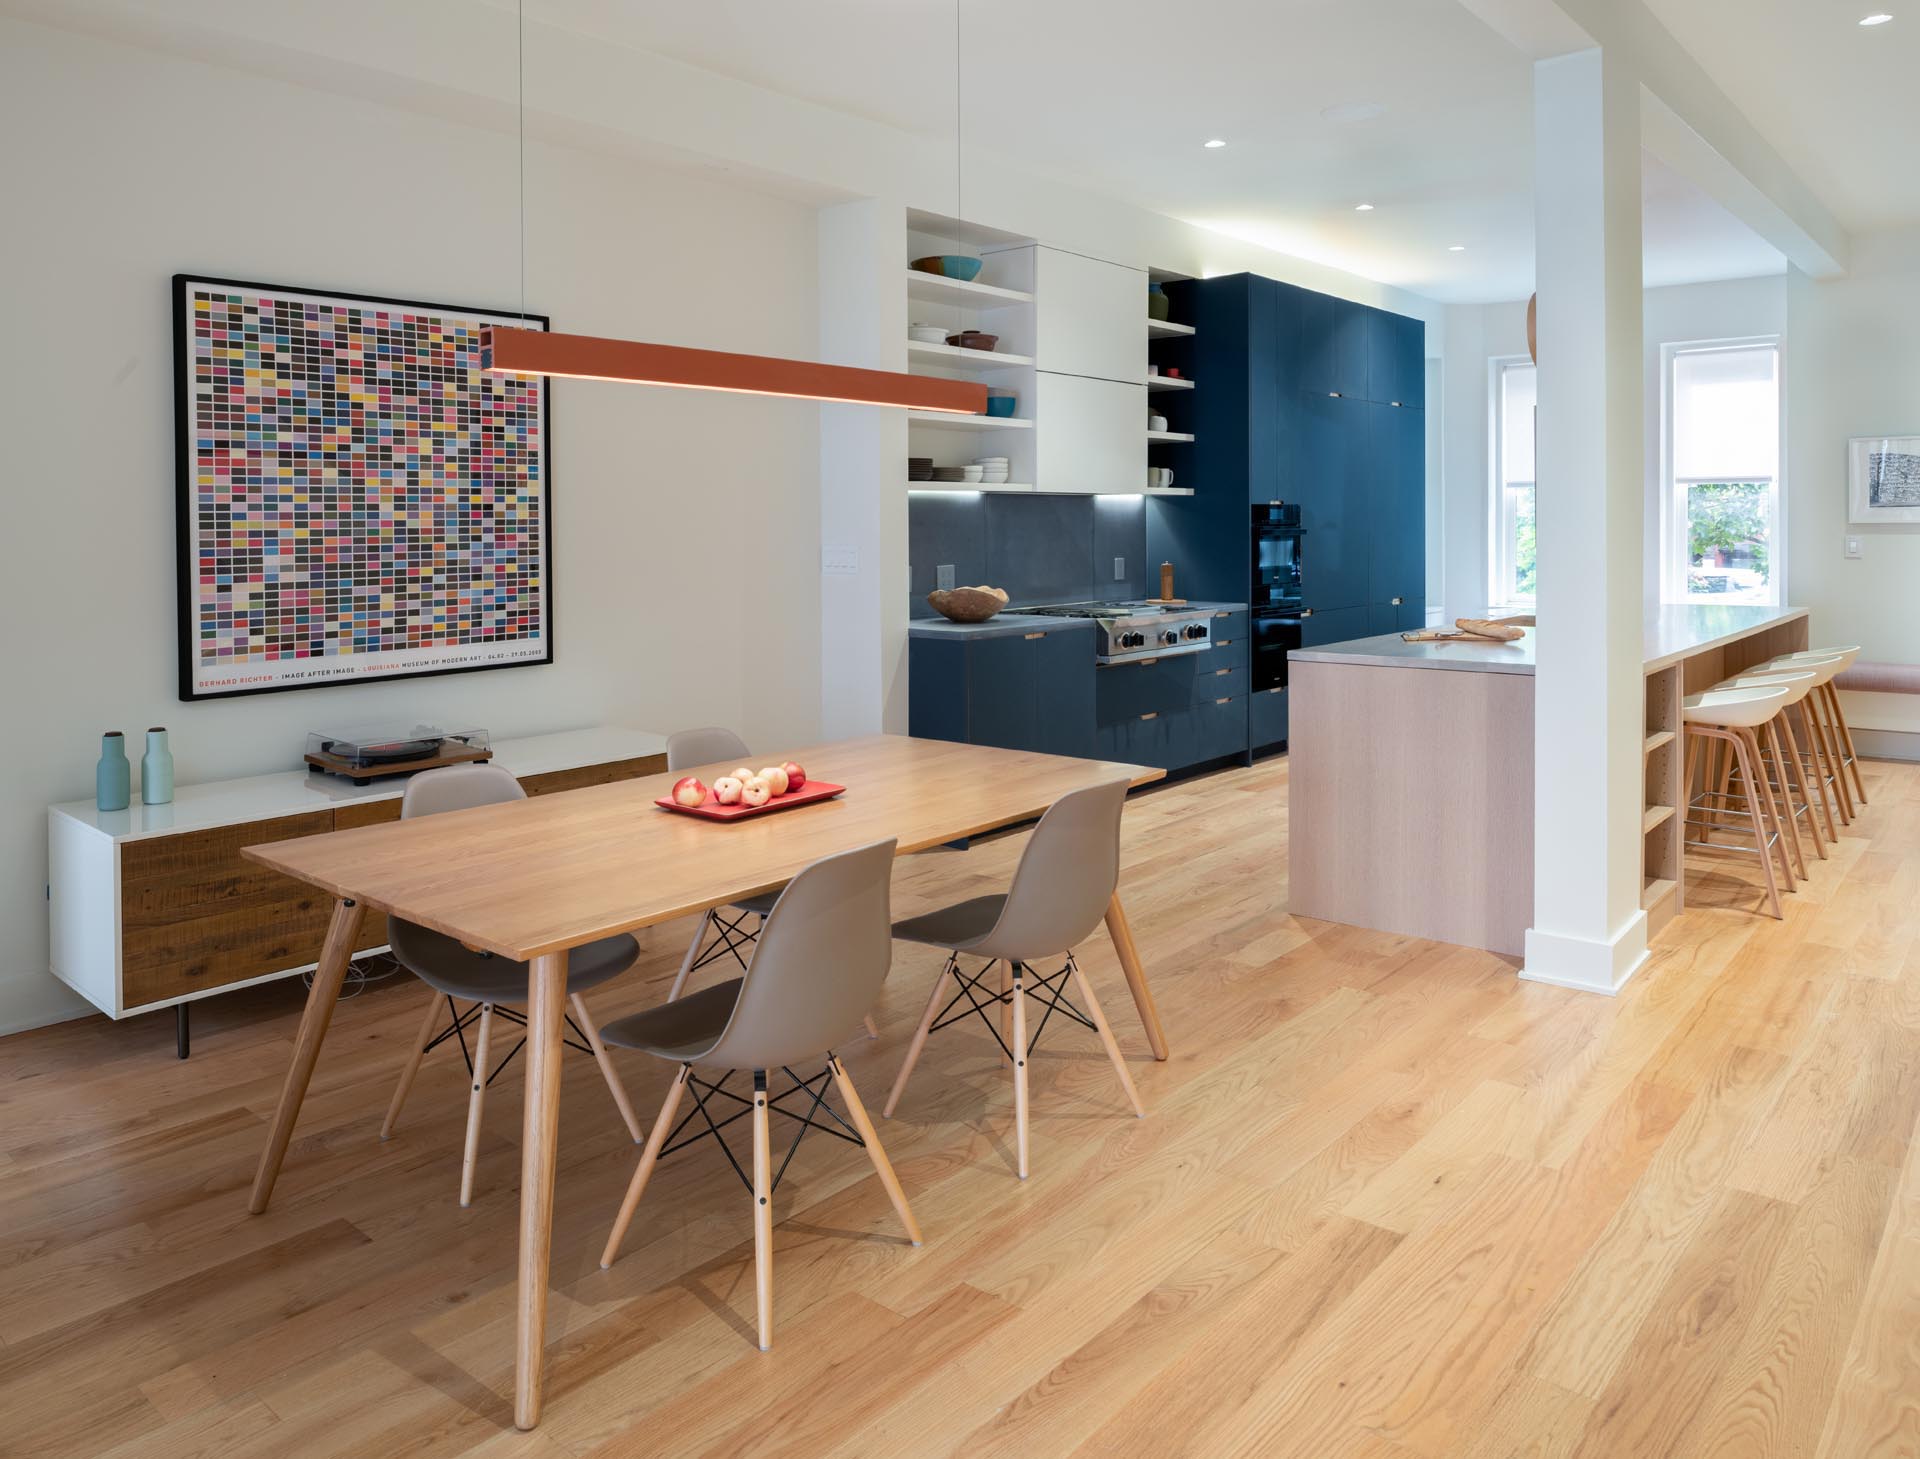 A modern and open plan kitchen and dining area with wood floors.